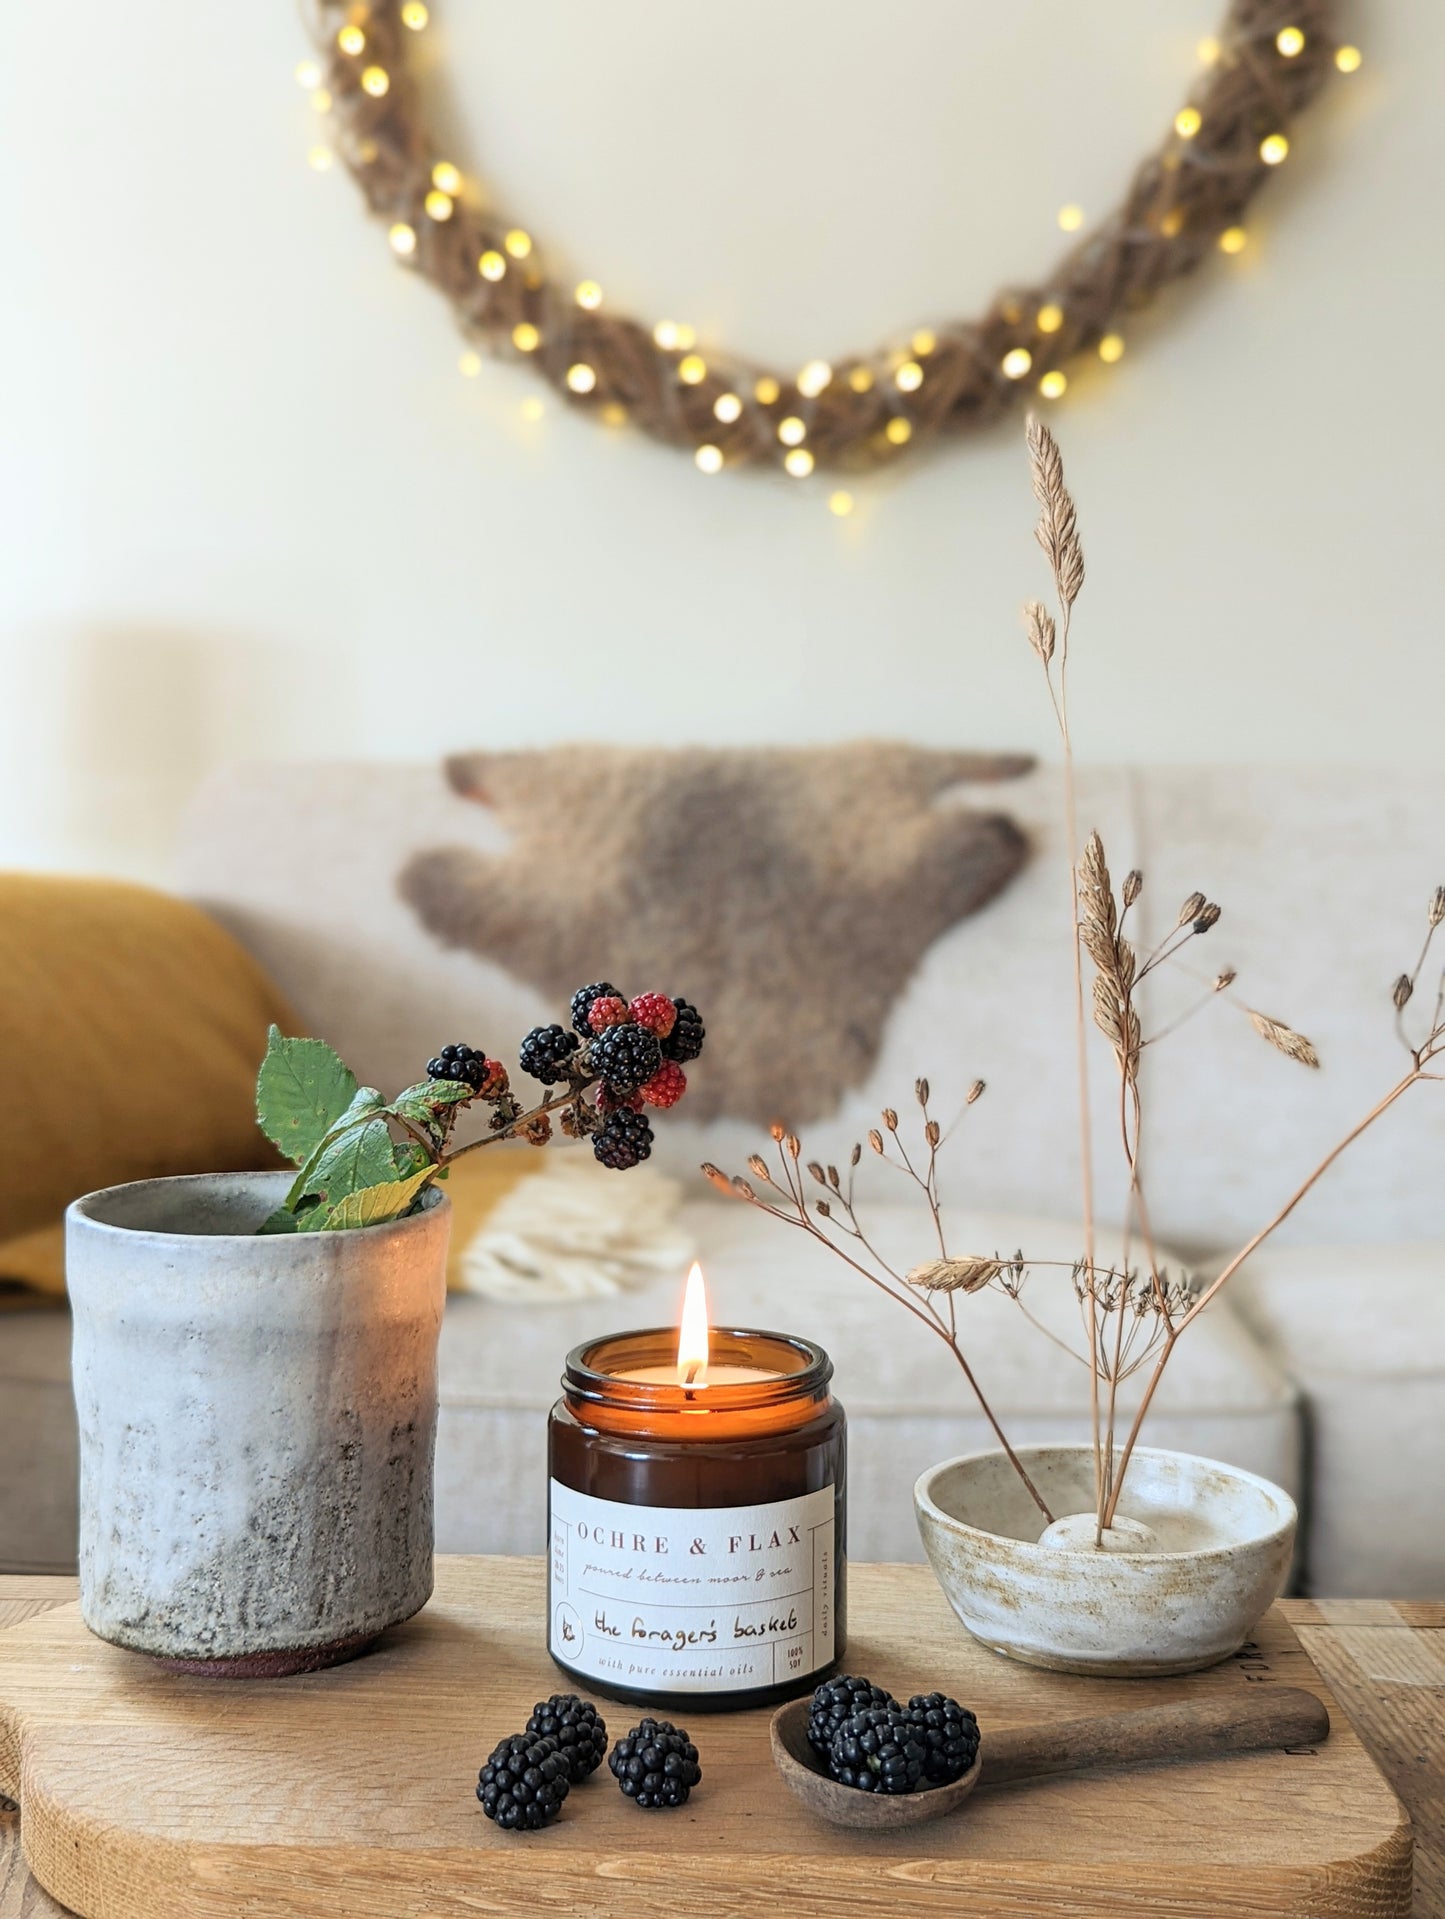 The Forager's Basket Candle